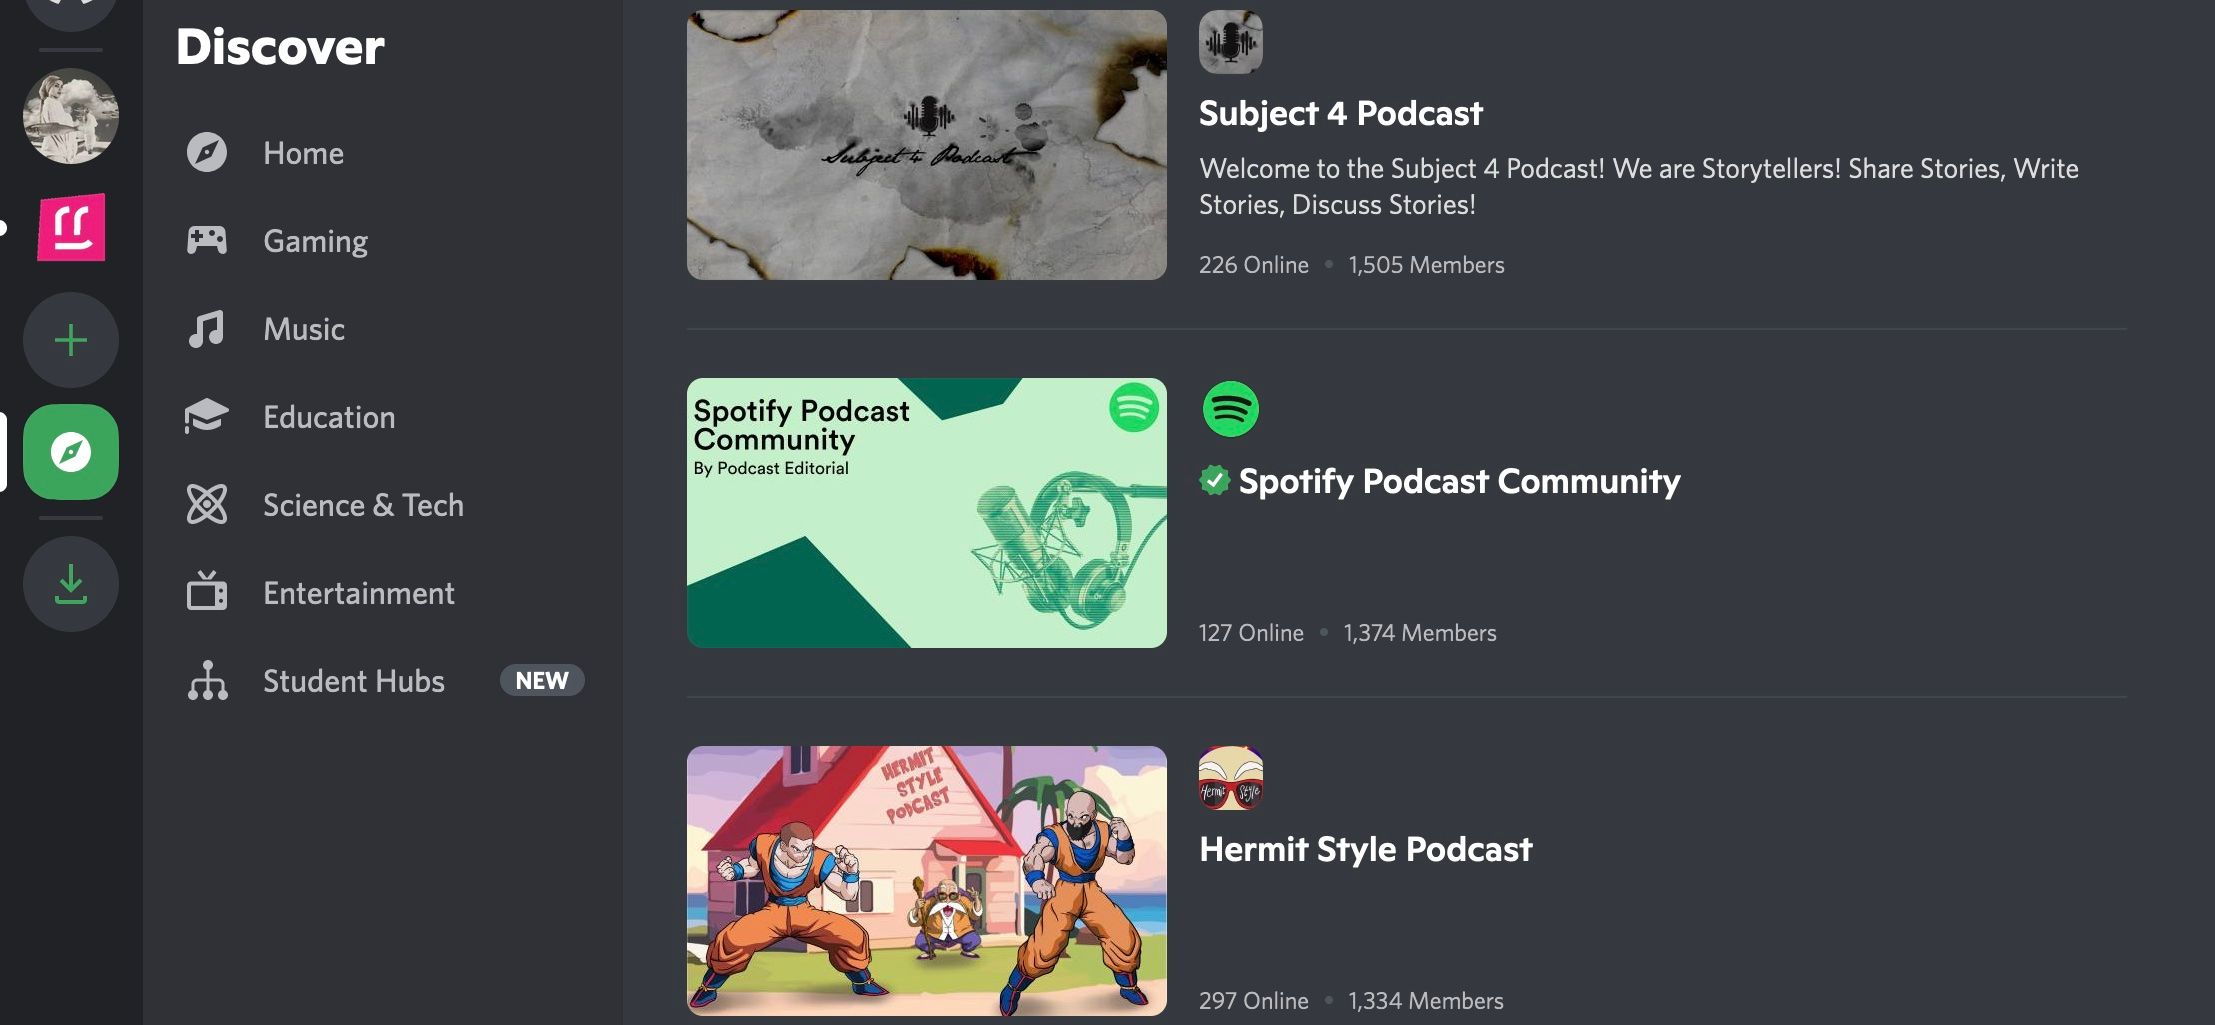 A screenshot of Discord showing search results for communities about podcasting.